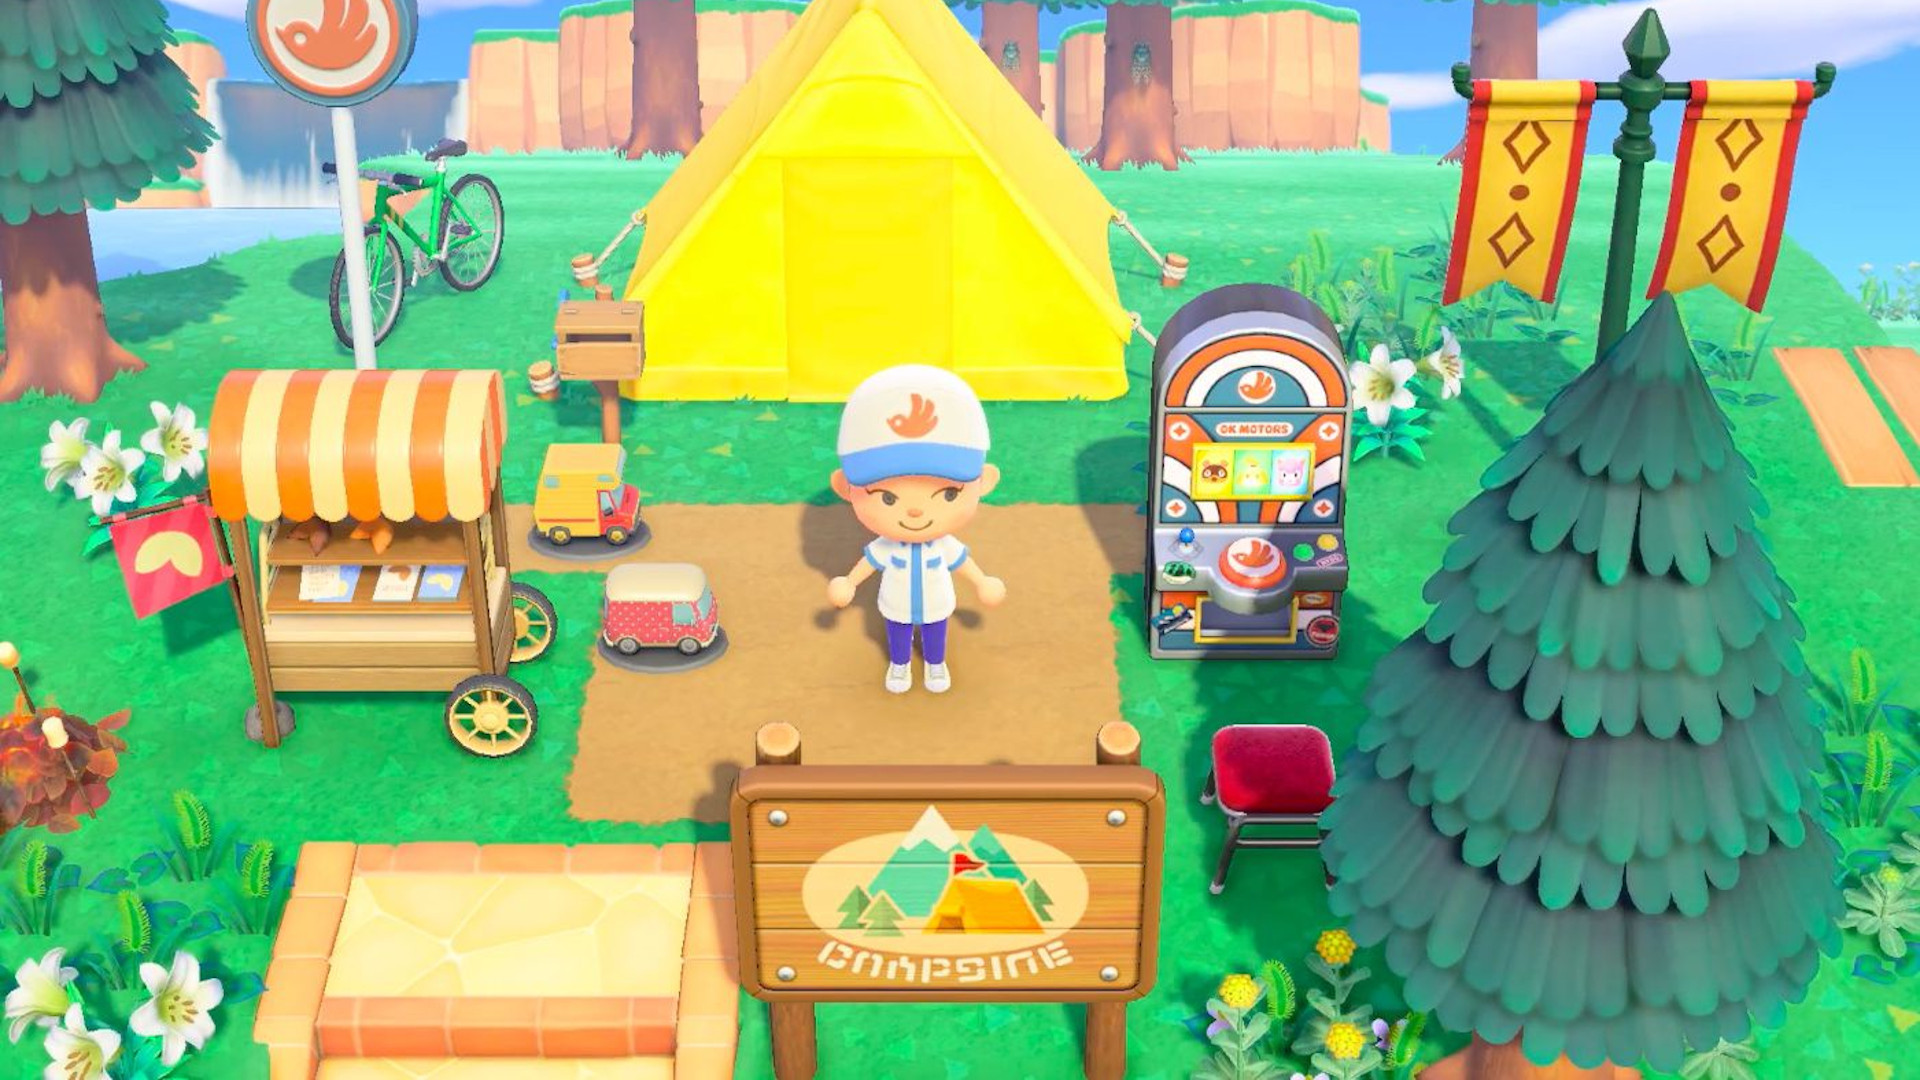 Animal Crossing New Horizons island ideas: Animal Crossing Pocket Camp items surrounding the character.